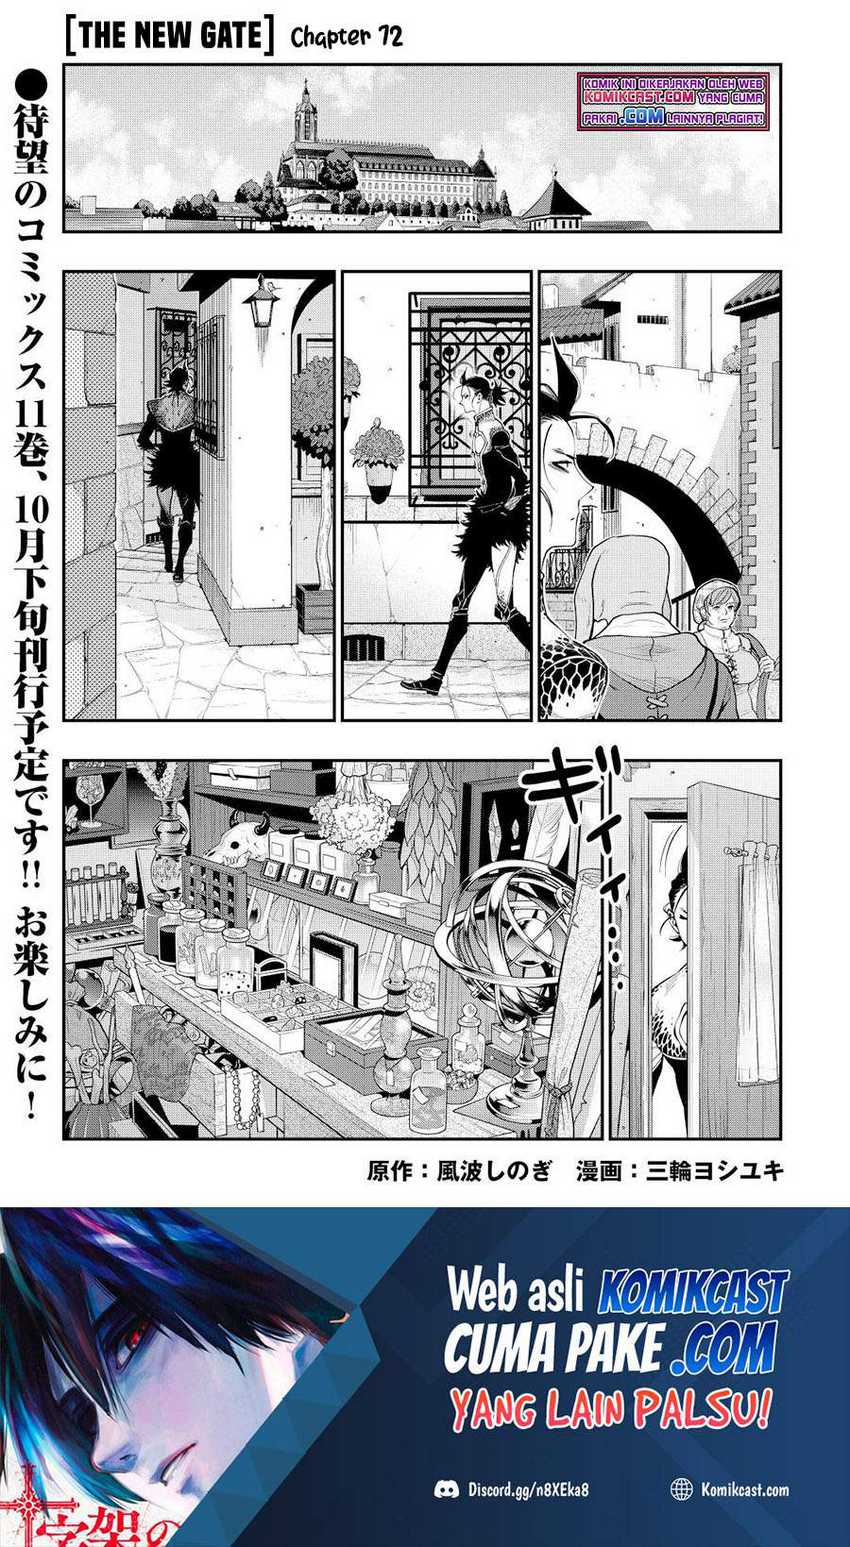 The New Gate Chapter 72 - 135